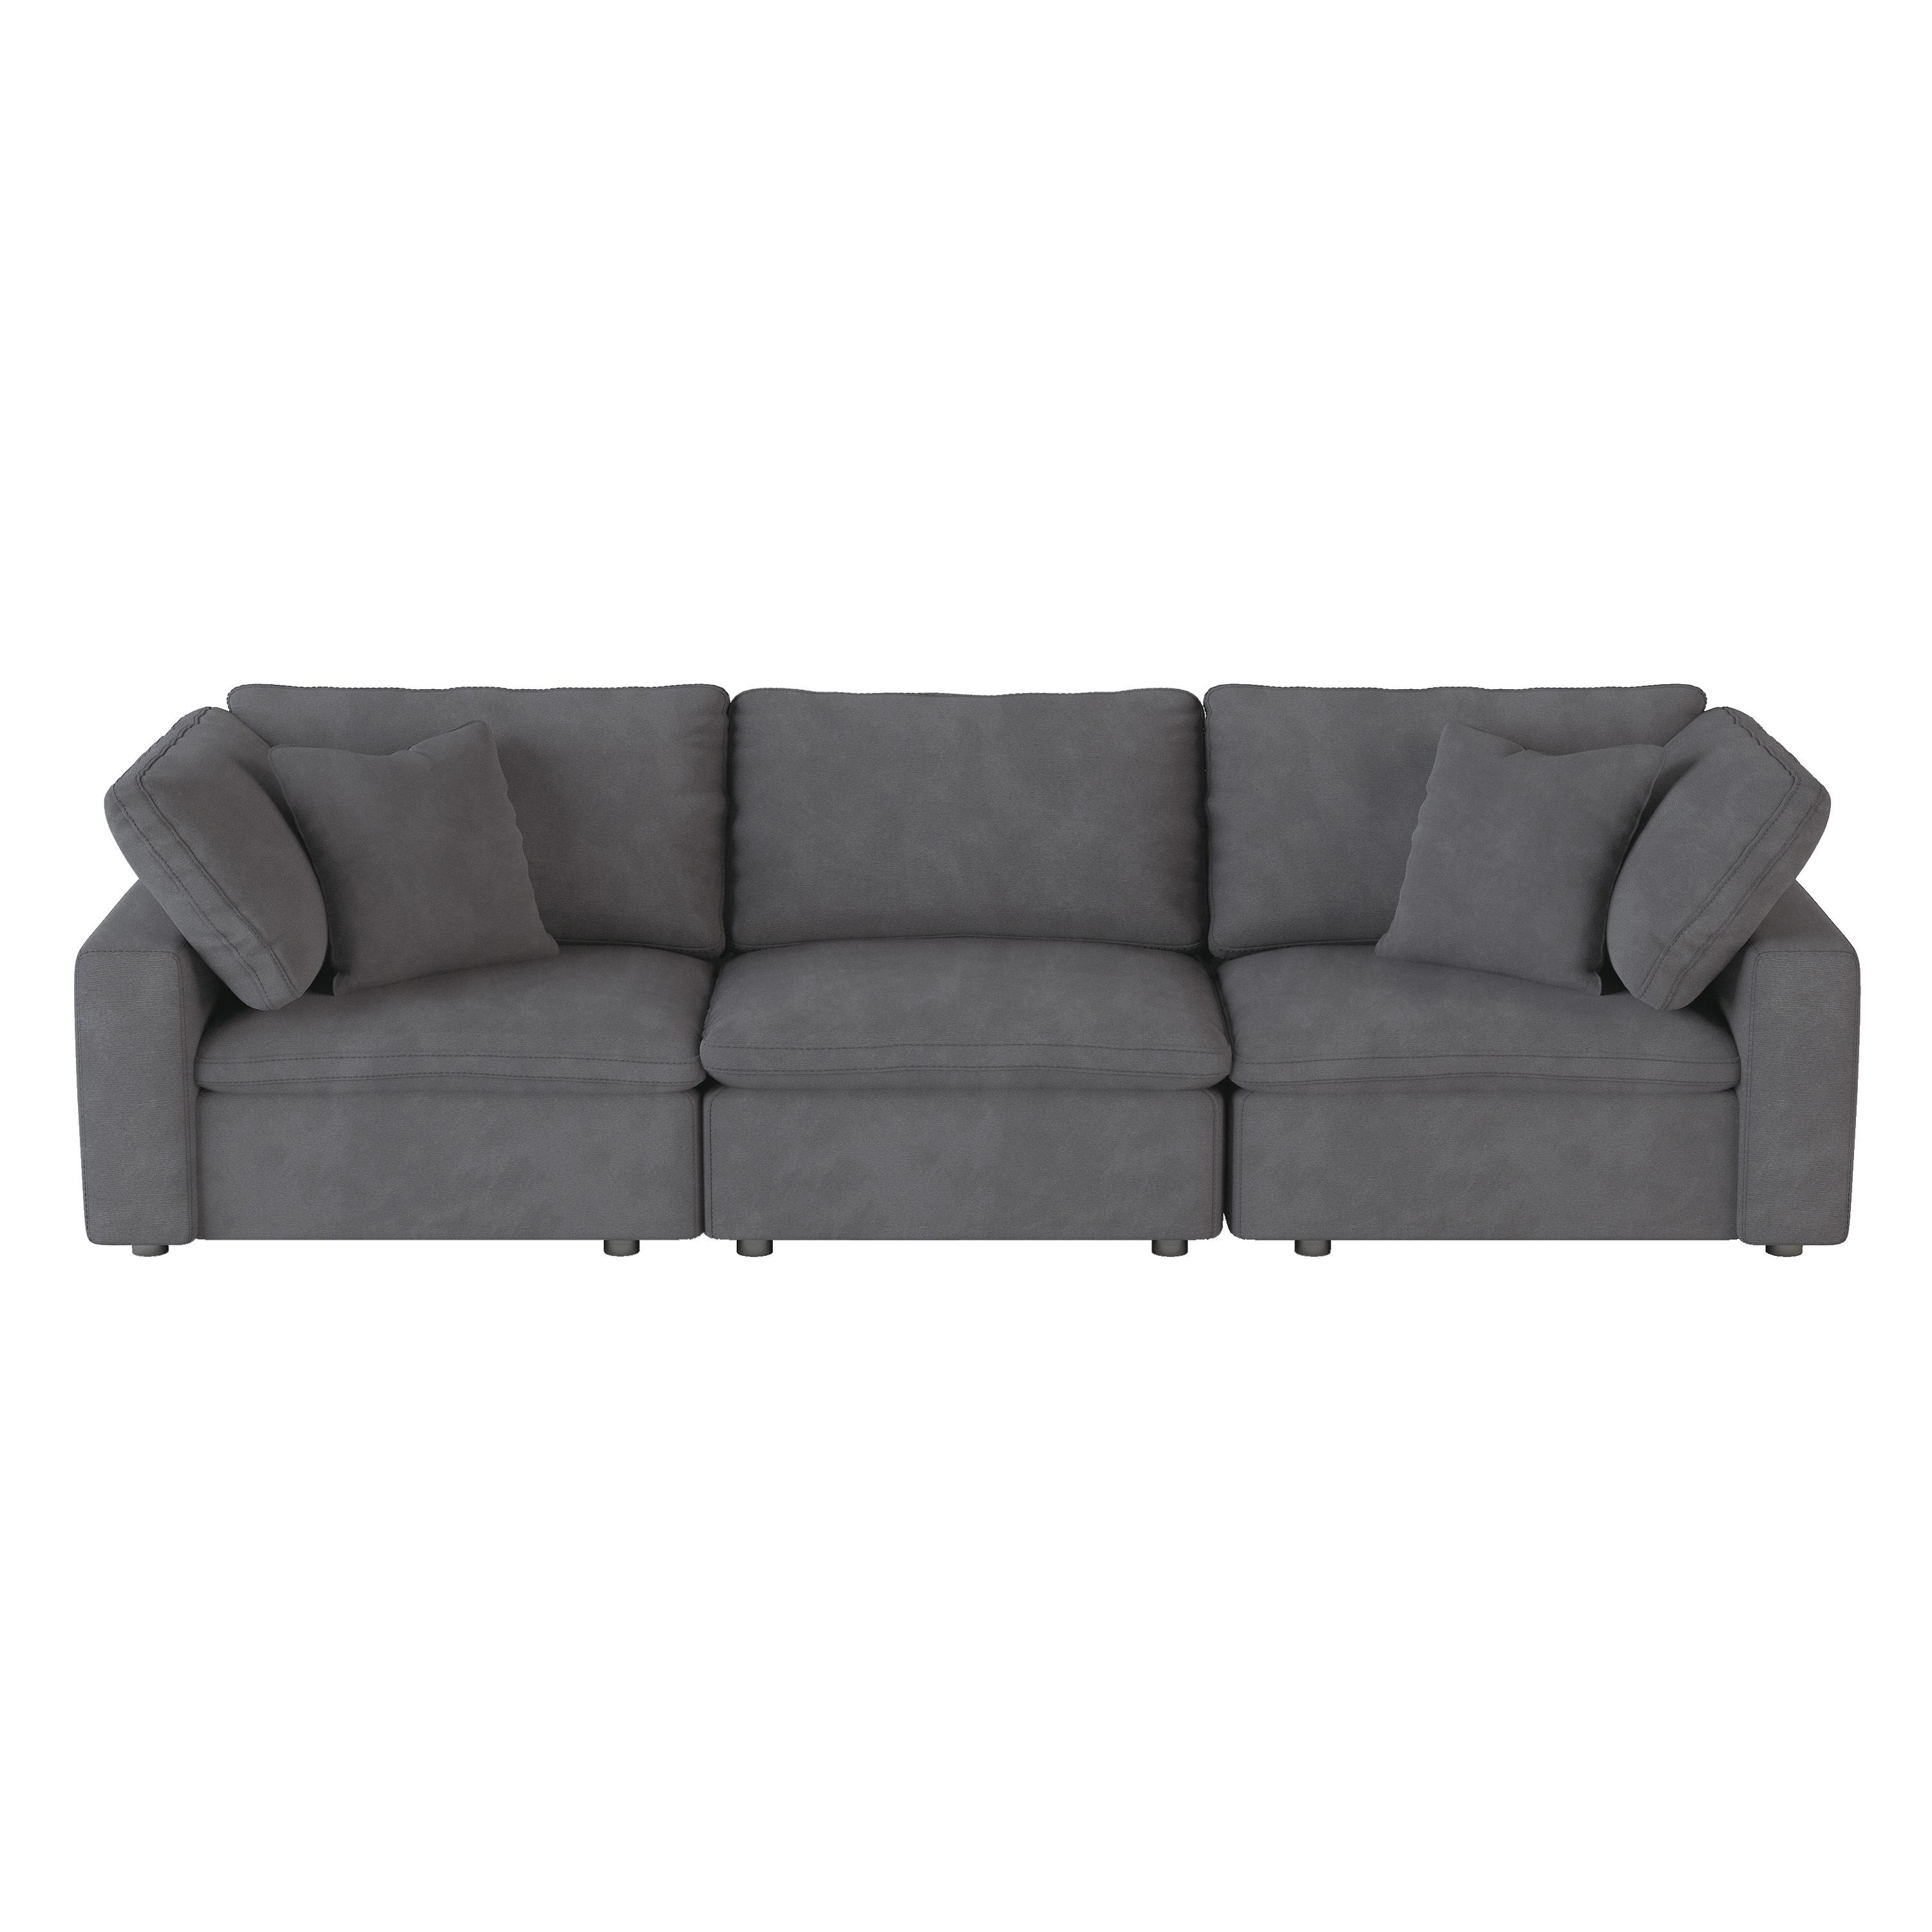 Transitional Sofa 9546GY-3* Guthrie 9546GY-3* in Gray Microfiber